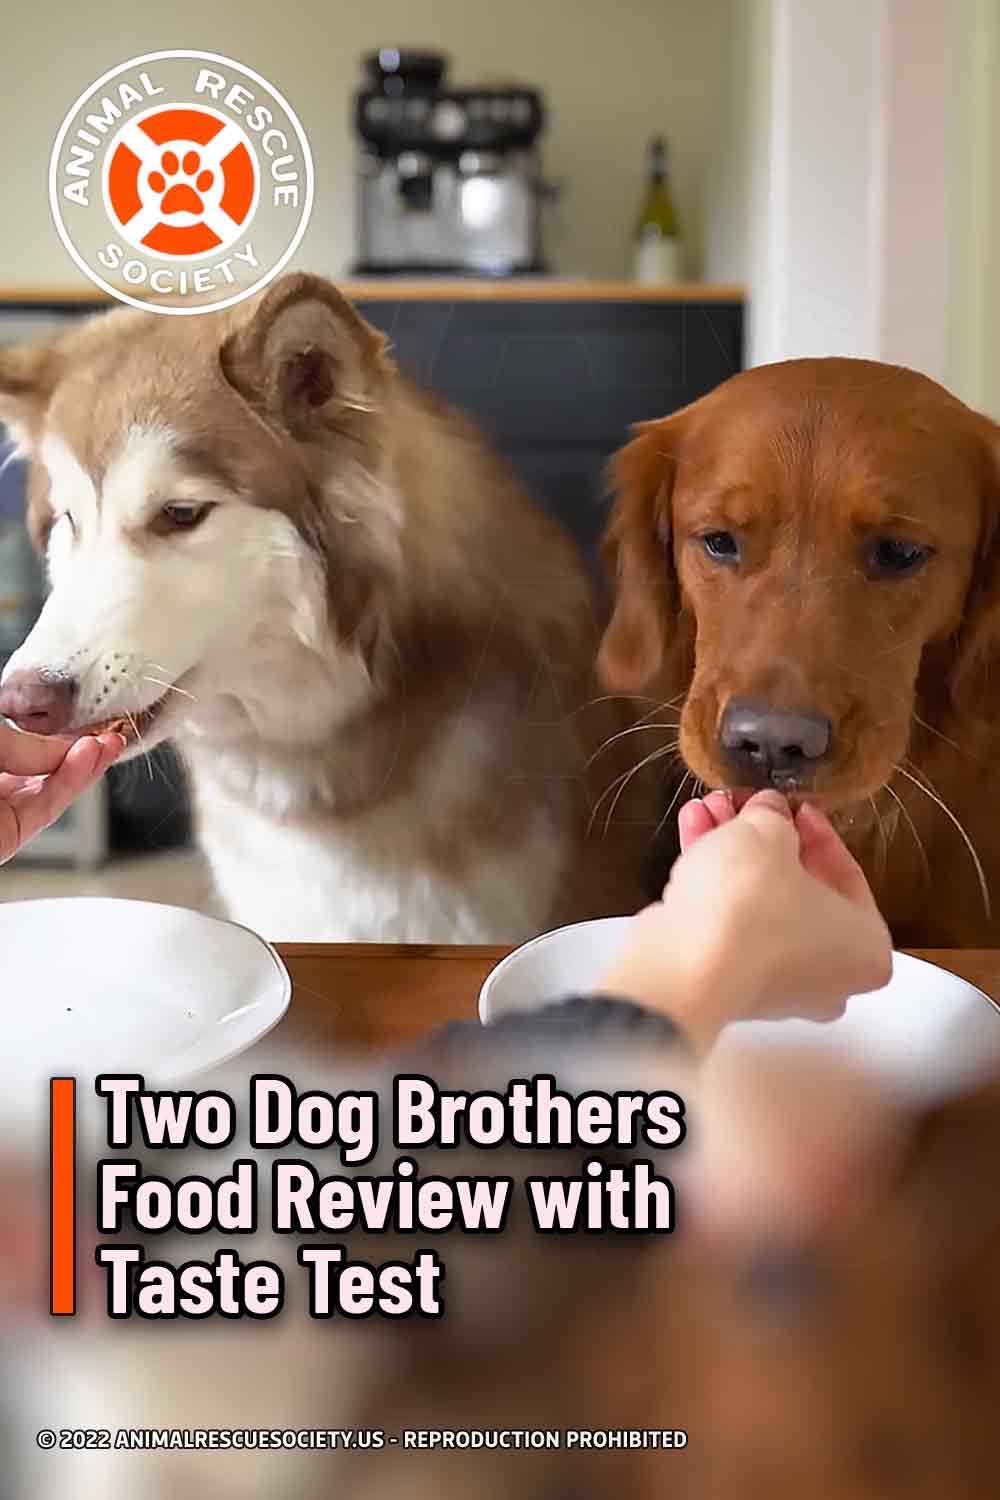 Two dog brothers food review with taste test